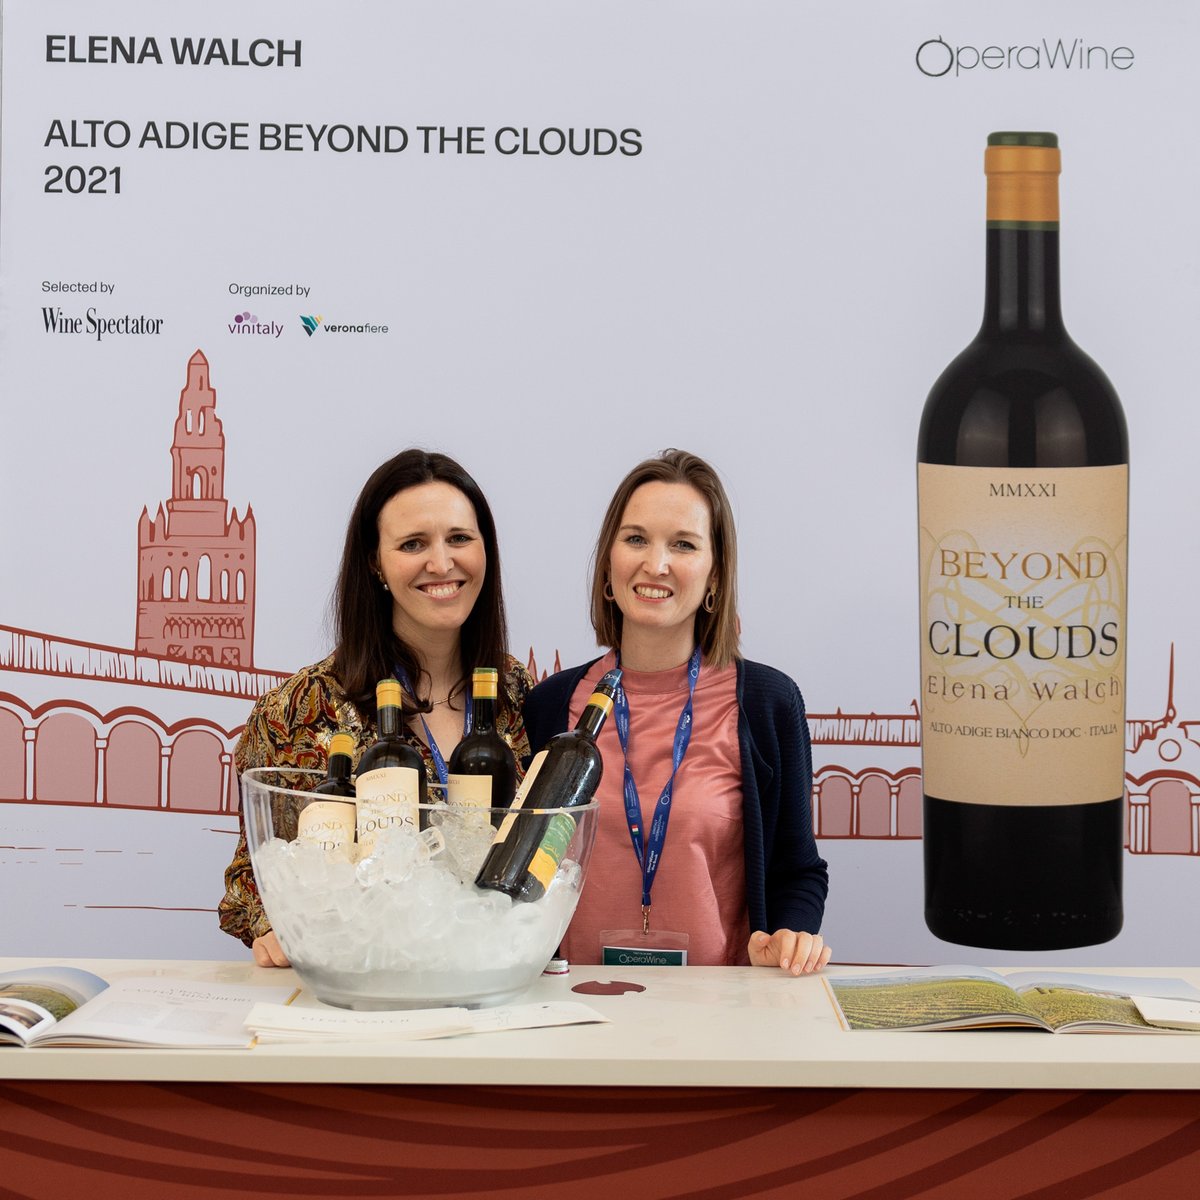 Here is the portrait of @ElenaWalch, one of the great Italian producers selected by Wine Spectator for #OperaWine2024. During this year's Grand Tasting, they shared with guests theirAlto Adige Beyond the Clouds 2021. Congratulations! #OperaWine #Vinitaly2024 #finestitalianwines